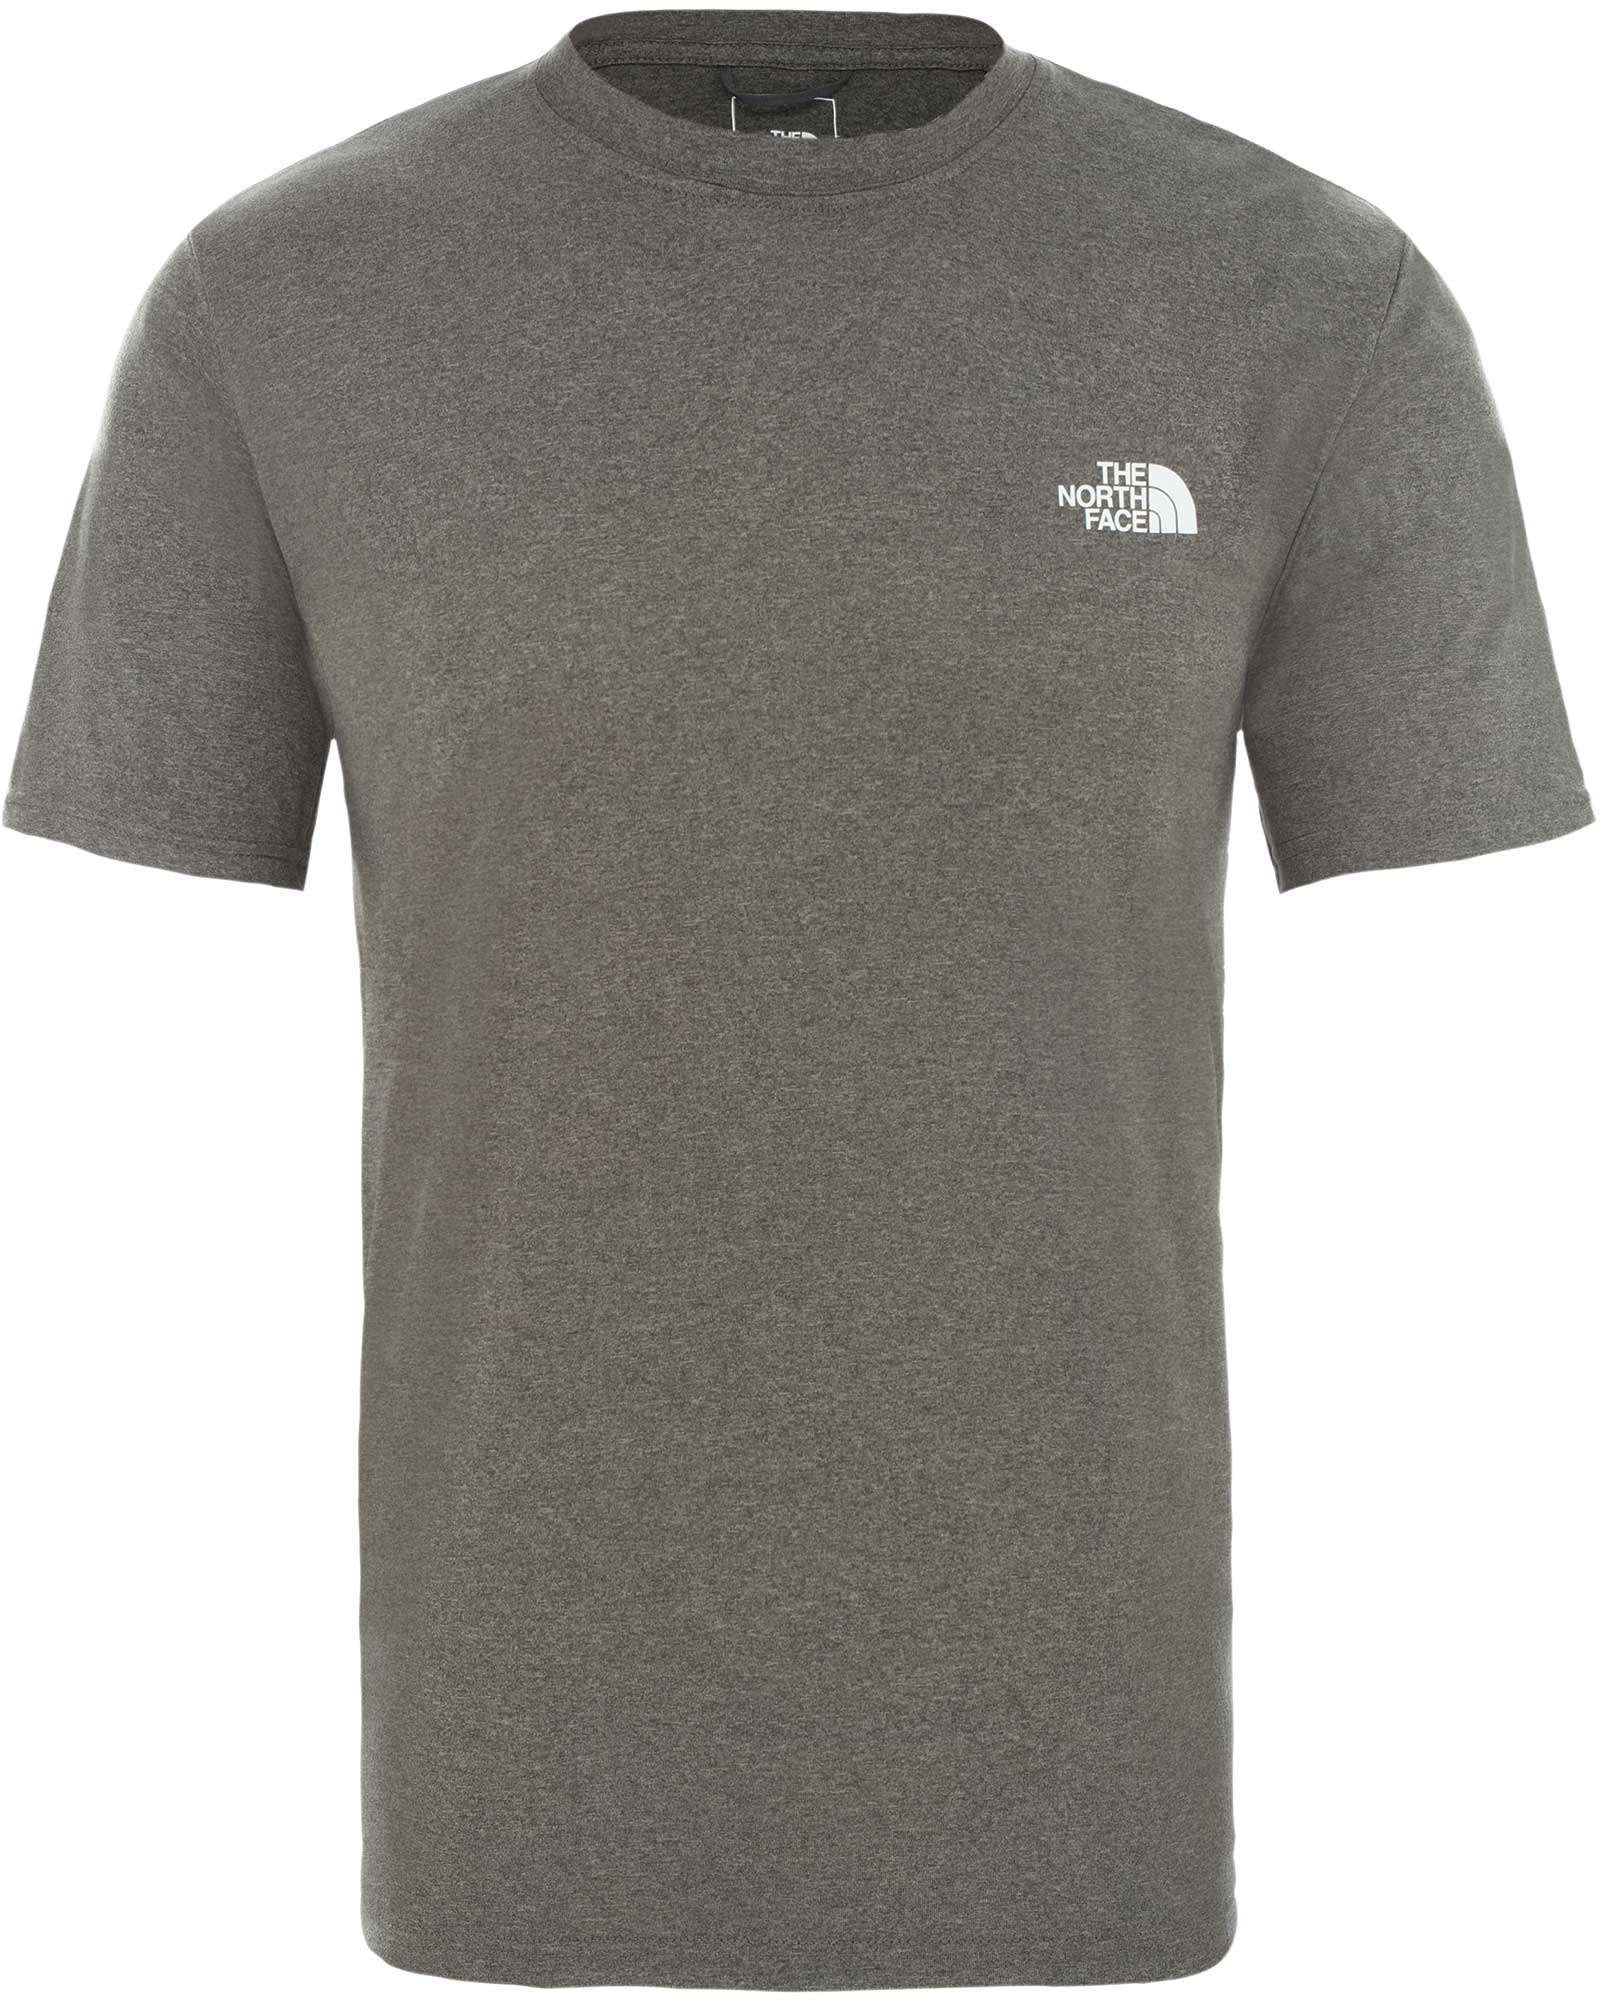 The North Face Reaxion Amp Men’s Crew T Shirt - New Taupe Green Heather XS